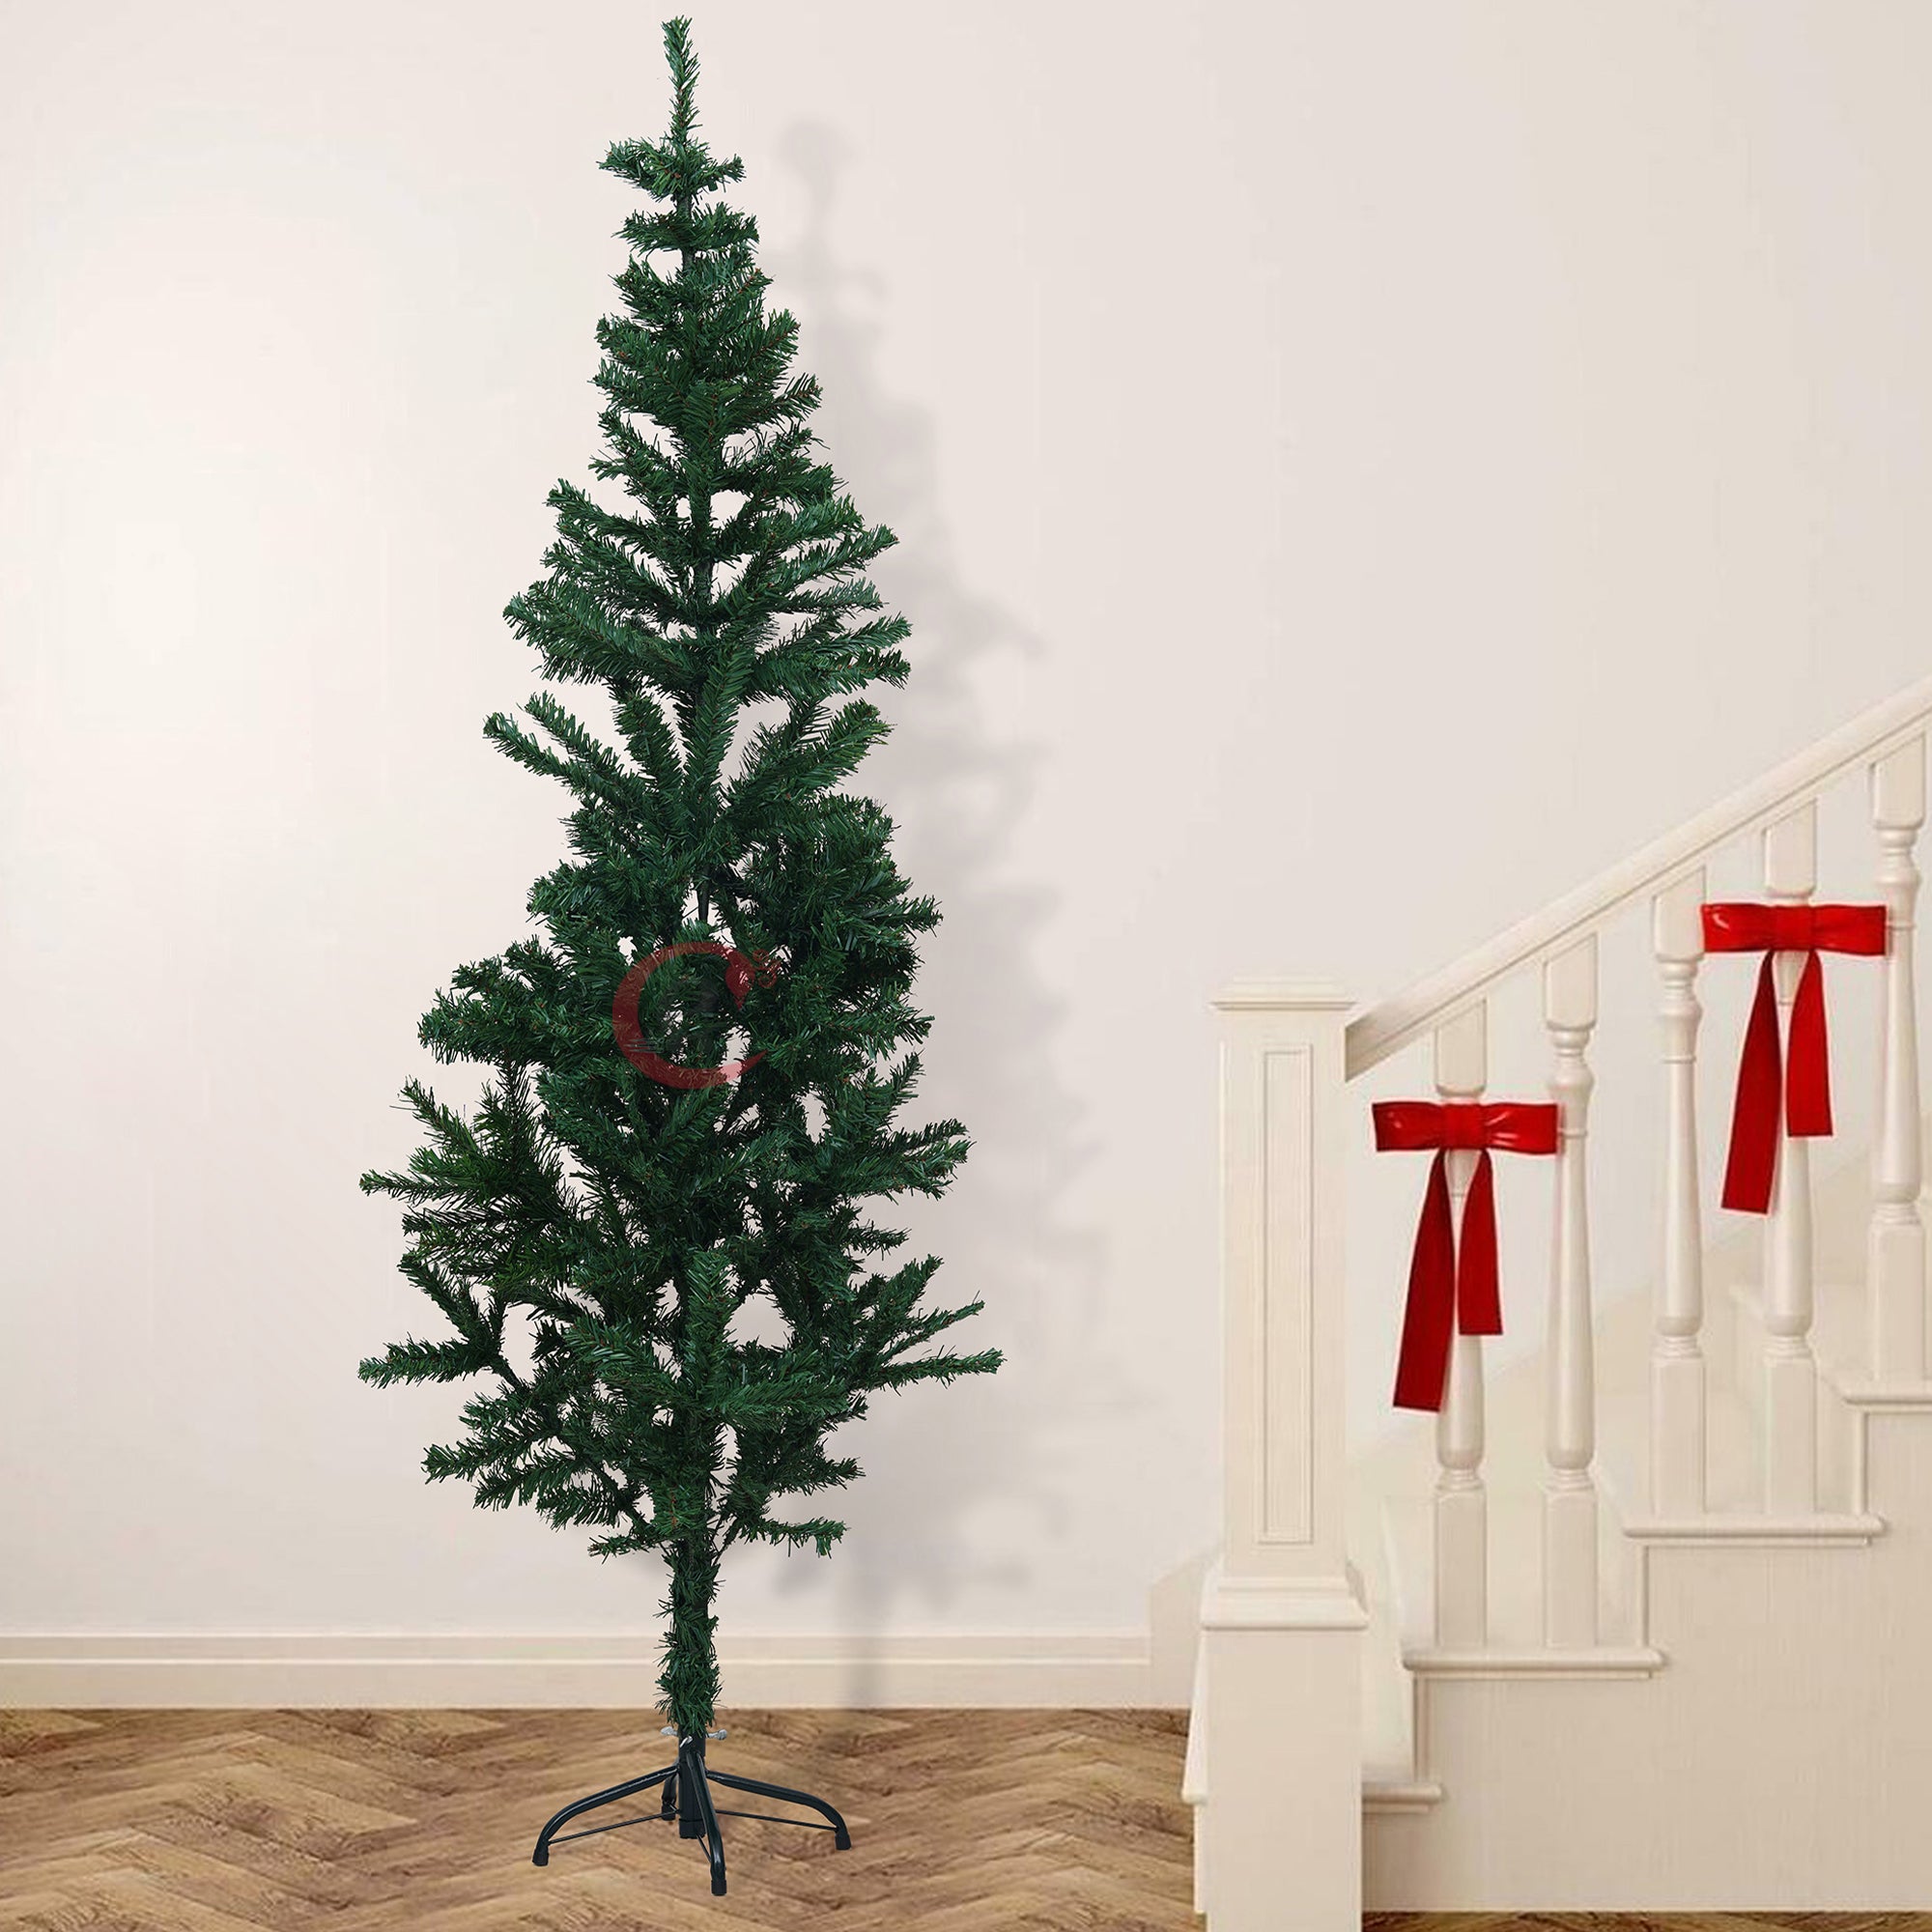 eCraftIndia 6 Feet Green Artificial Christmas Tree Xmas Pine Tree with Stand and 100 Christmas Decoration Ornaments Props - Merry Christmas Decoration Item for Home, Office, and Church 4